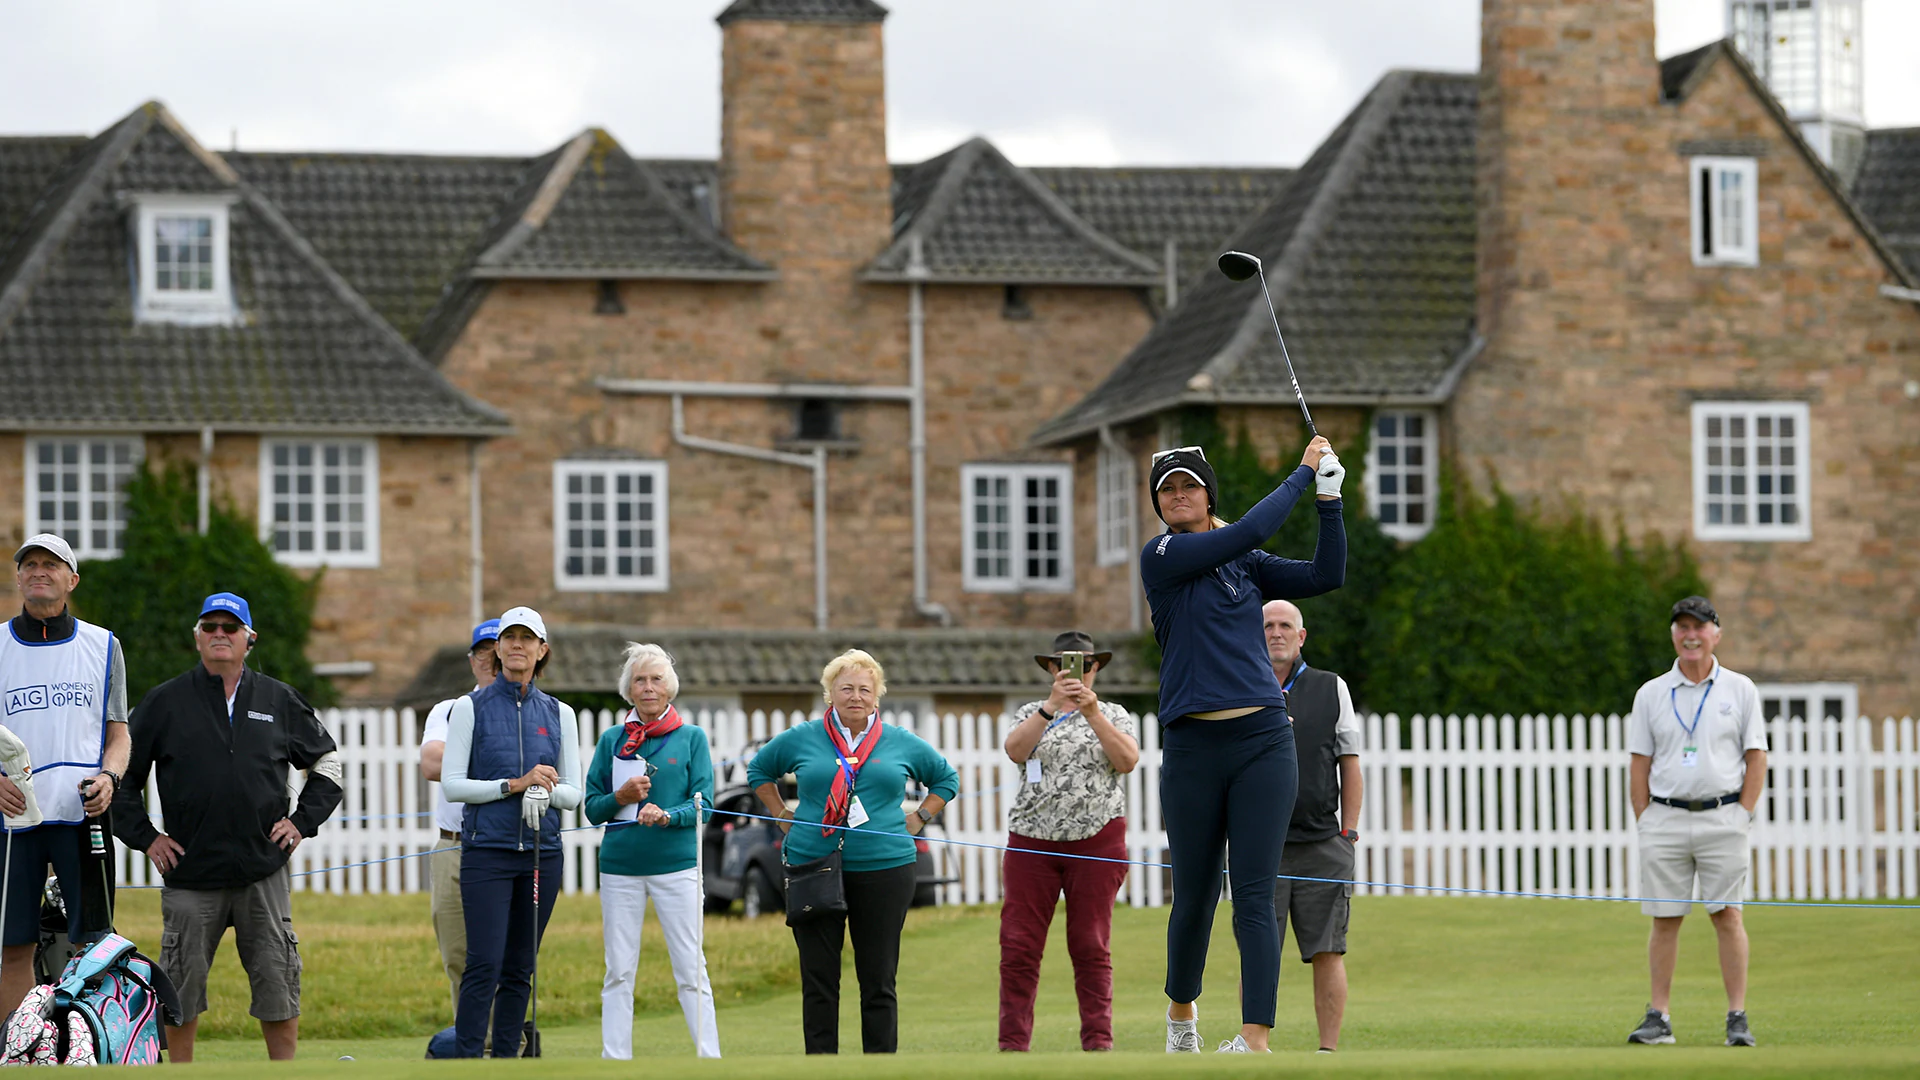 On cusp of Muirfield’s historic debut, this Women’s Open feels bigger than ever